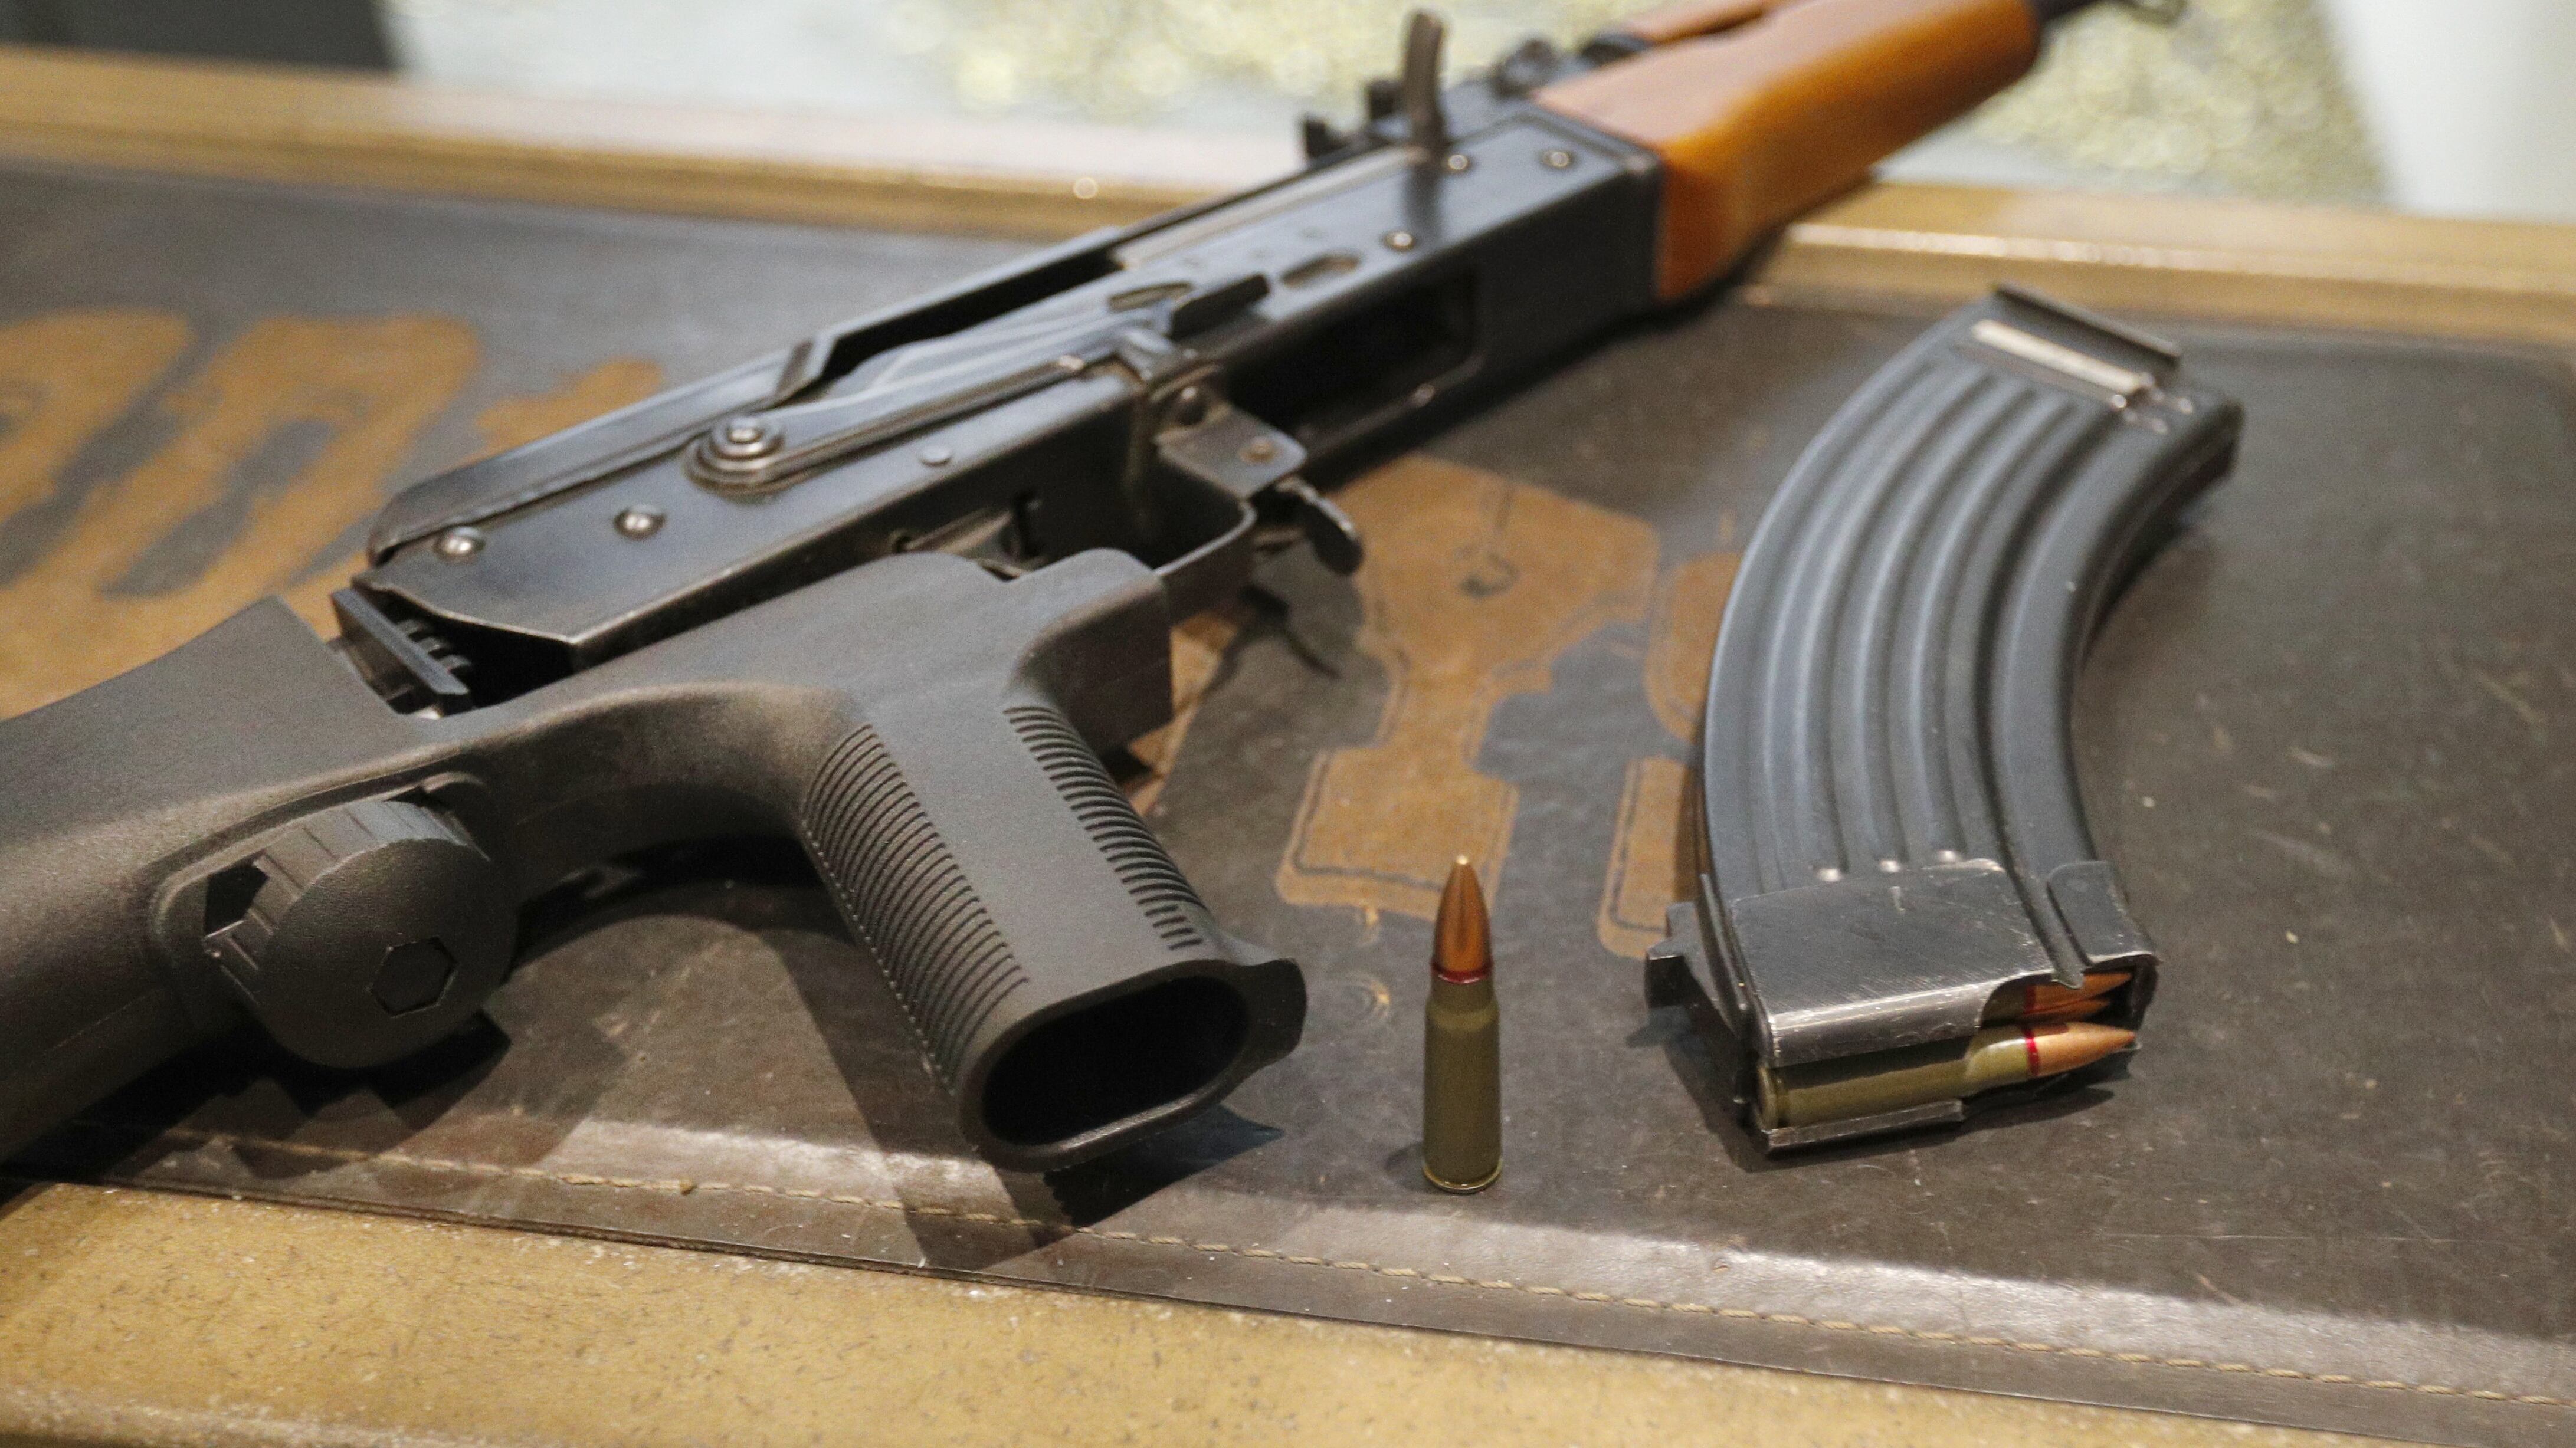 A 30-round magazine sits next to an AK-47 fitted with a bump stock, a device which allows a semi-automatic gun to fire at a rapid rate much like a fully automatic gun